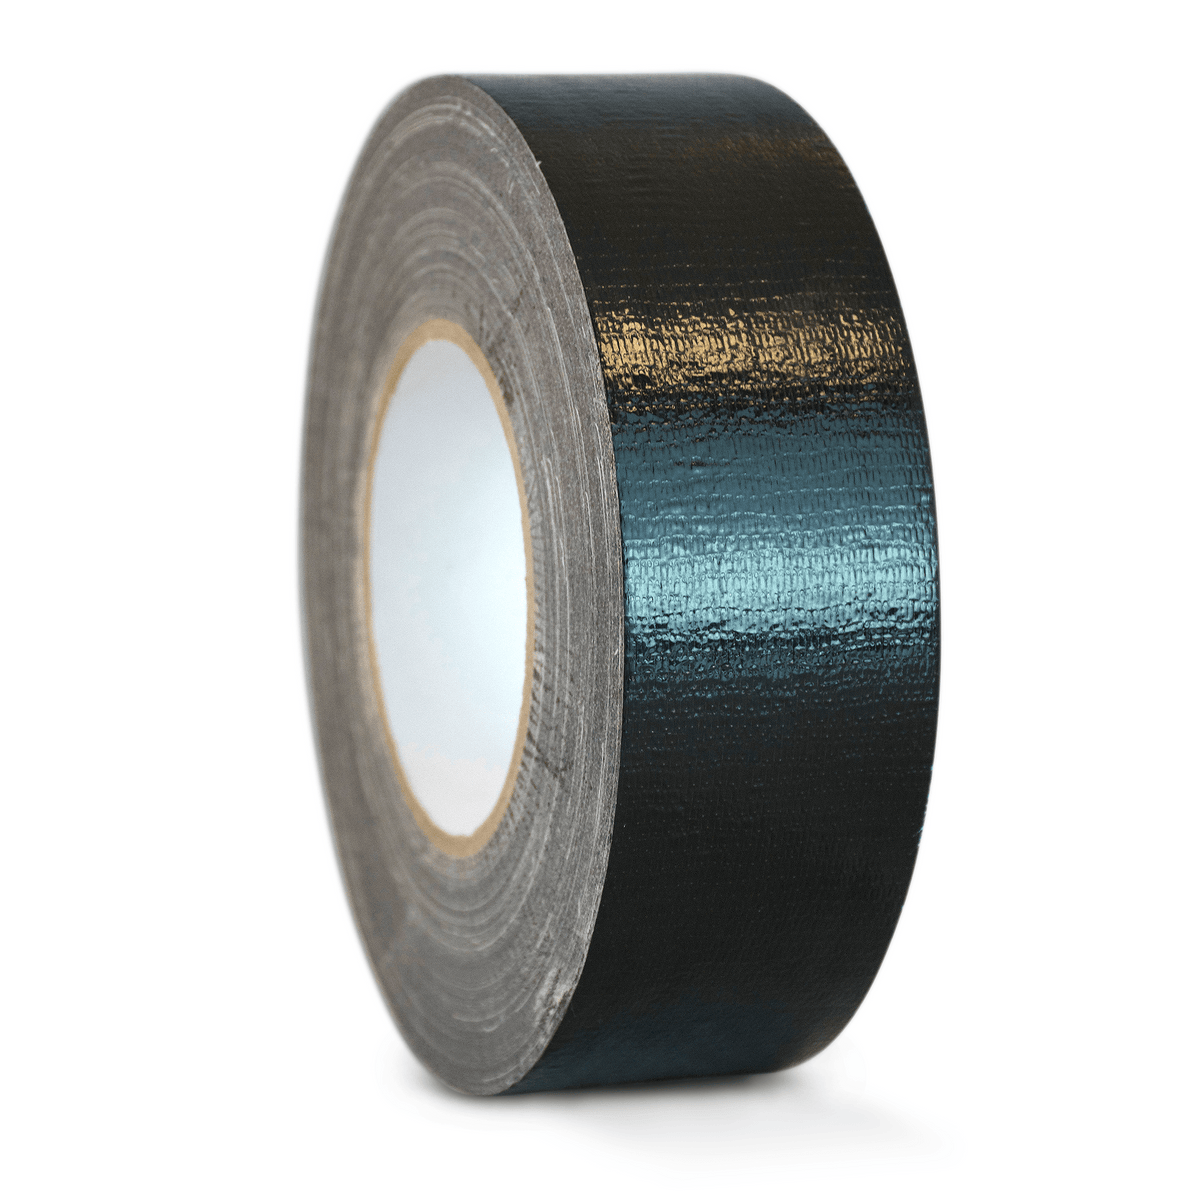  WOD DTC12 Contractor Grade Silver (Gray) Duct Tape 12